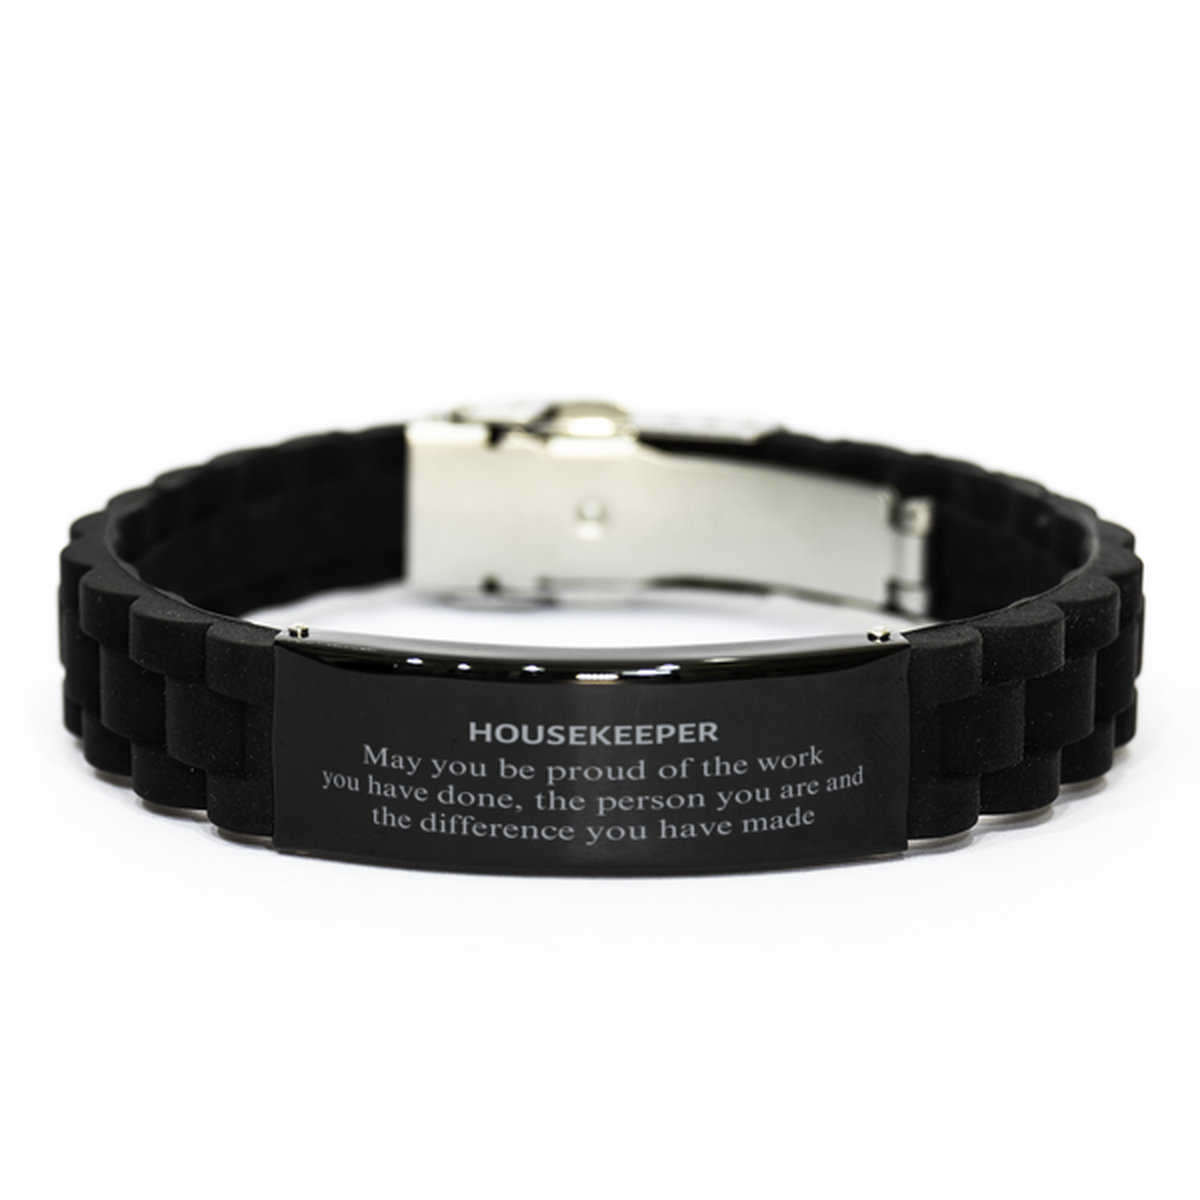 Housekeeper May you be proud of the work you have done, Retirement Housekeeper Black Glidelock Clasp Bracelet for Colleague Appreciation Gifts Amazing for Housekeeper